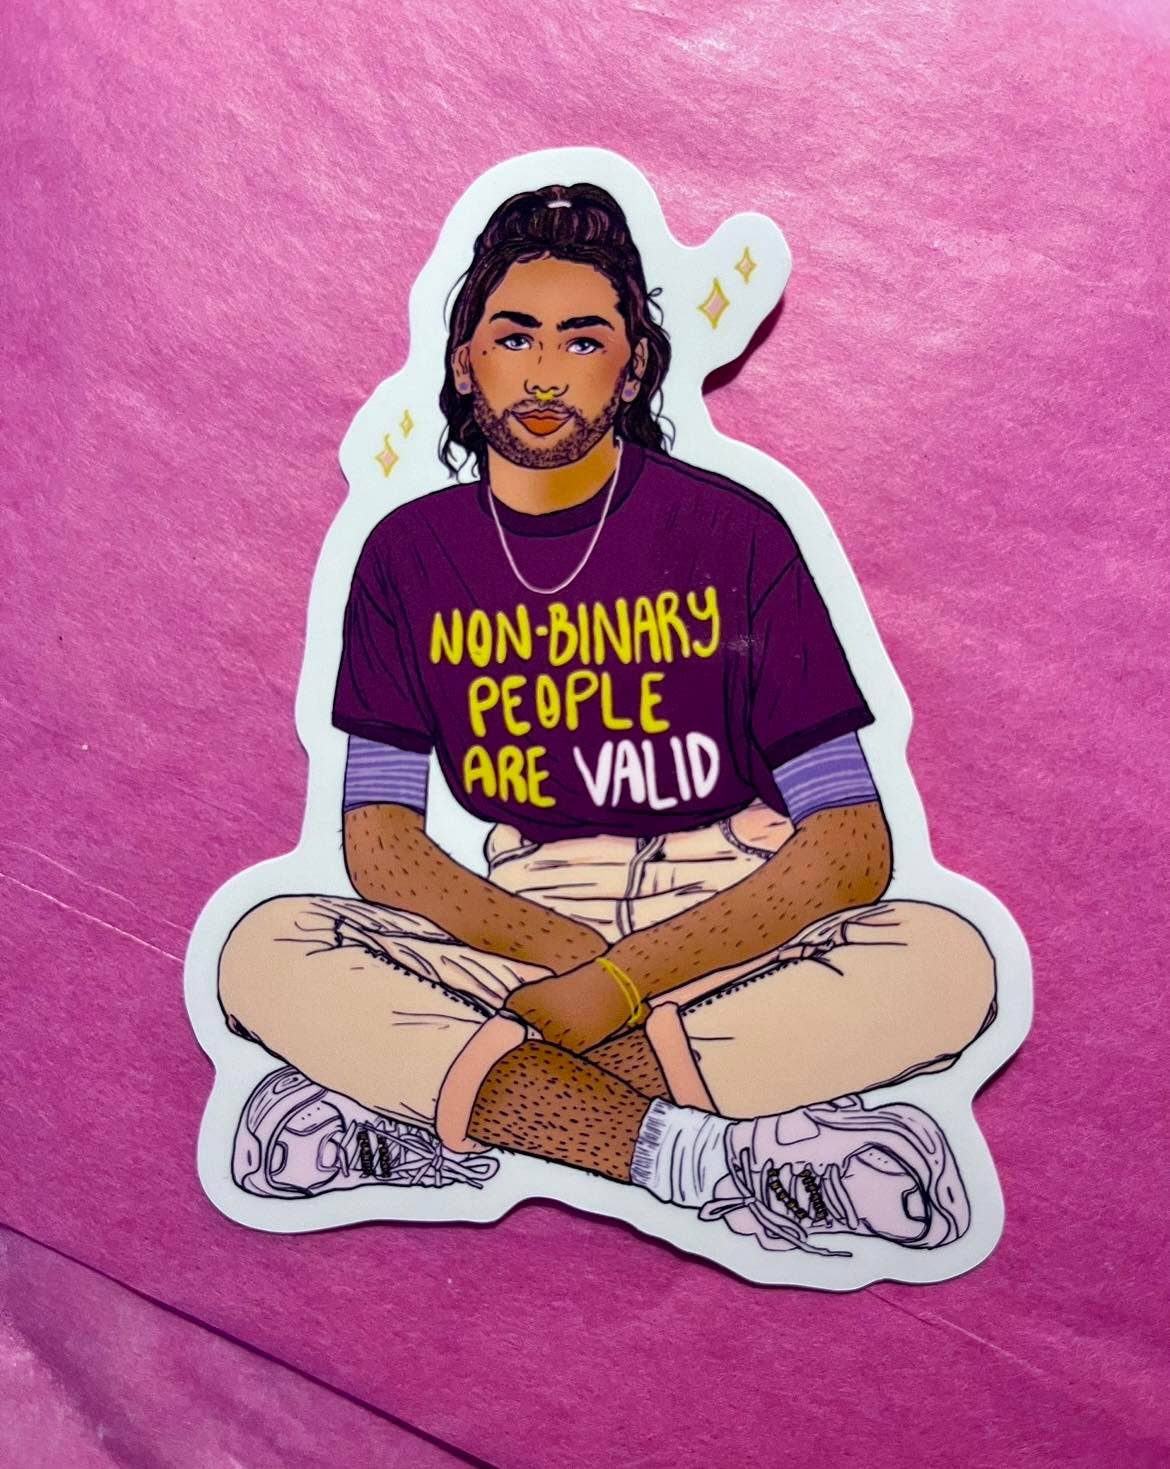 Nonbinary People are Valid - Sticker (Glossy)